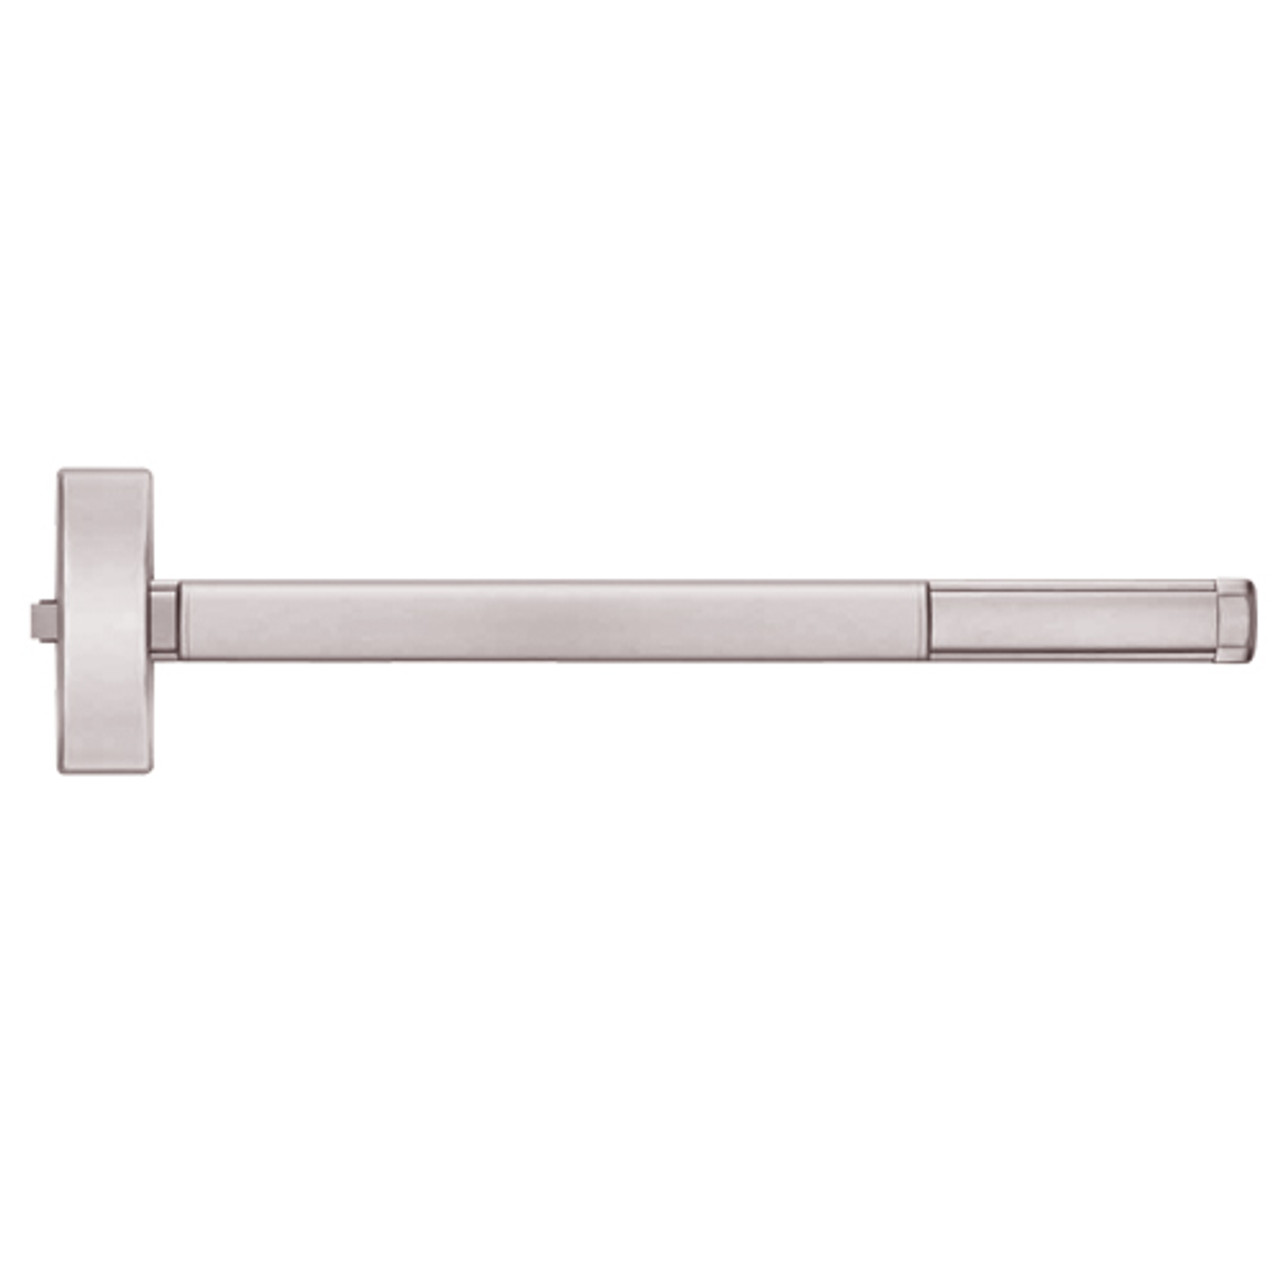 FL2105-628-48 PHI 2100 Series Fire Rated Apex Rim Exit Device Prepped for Key Controls Thumb Piece in Satin Aluminum Finish